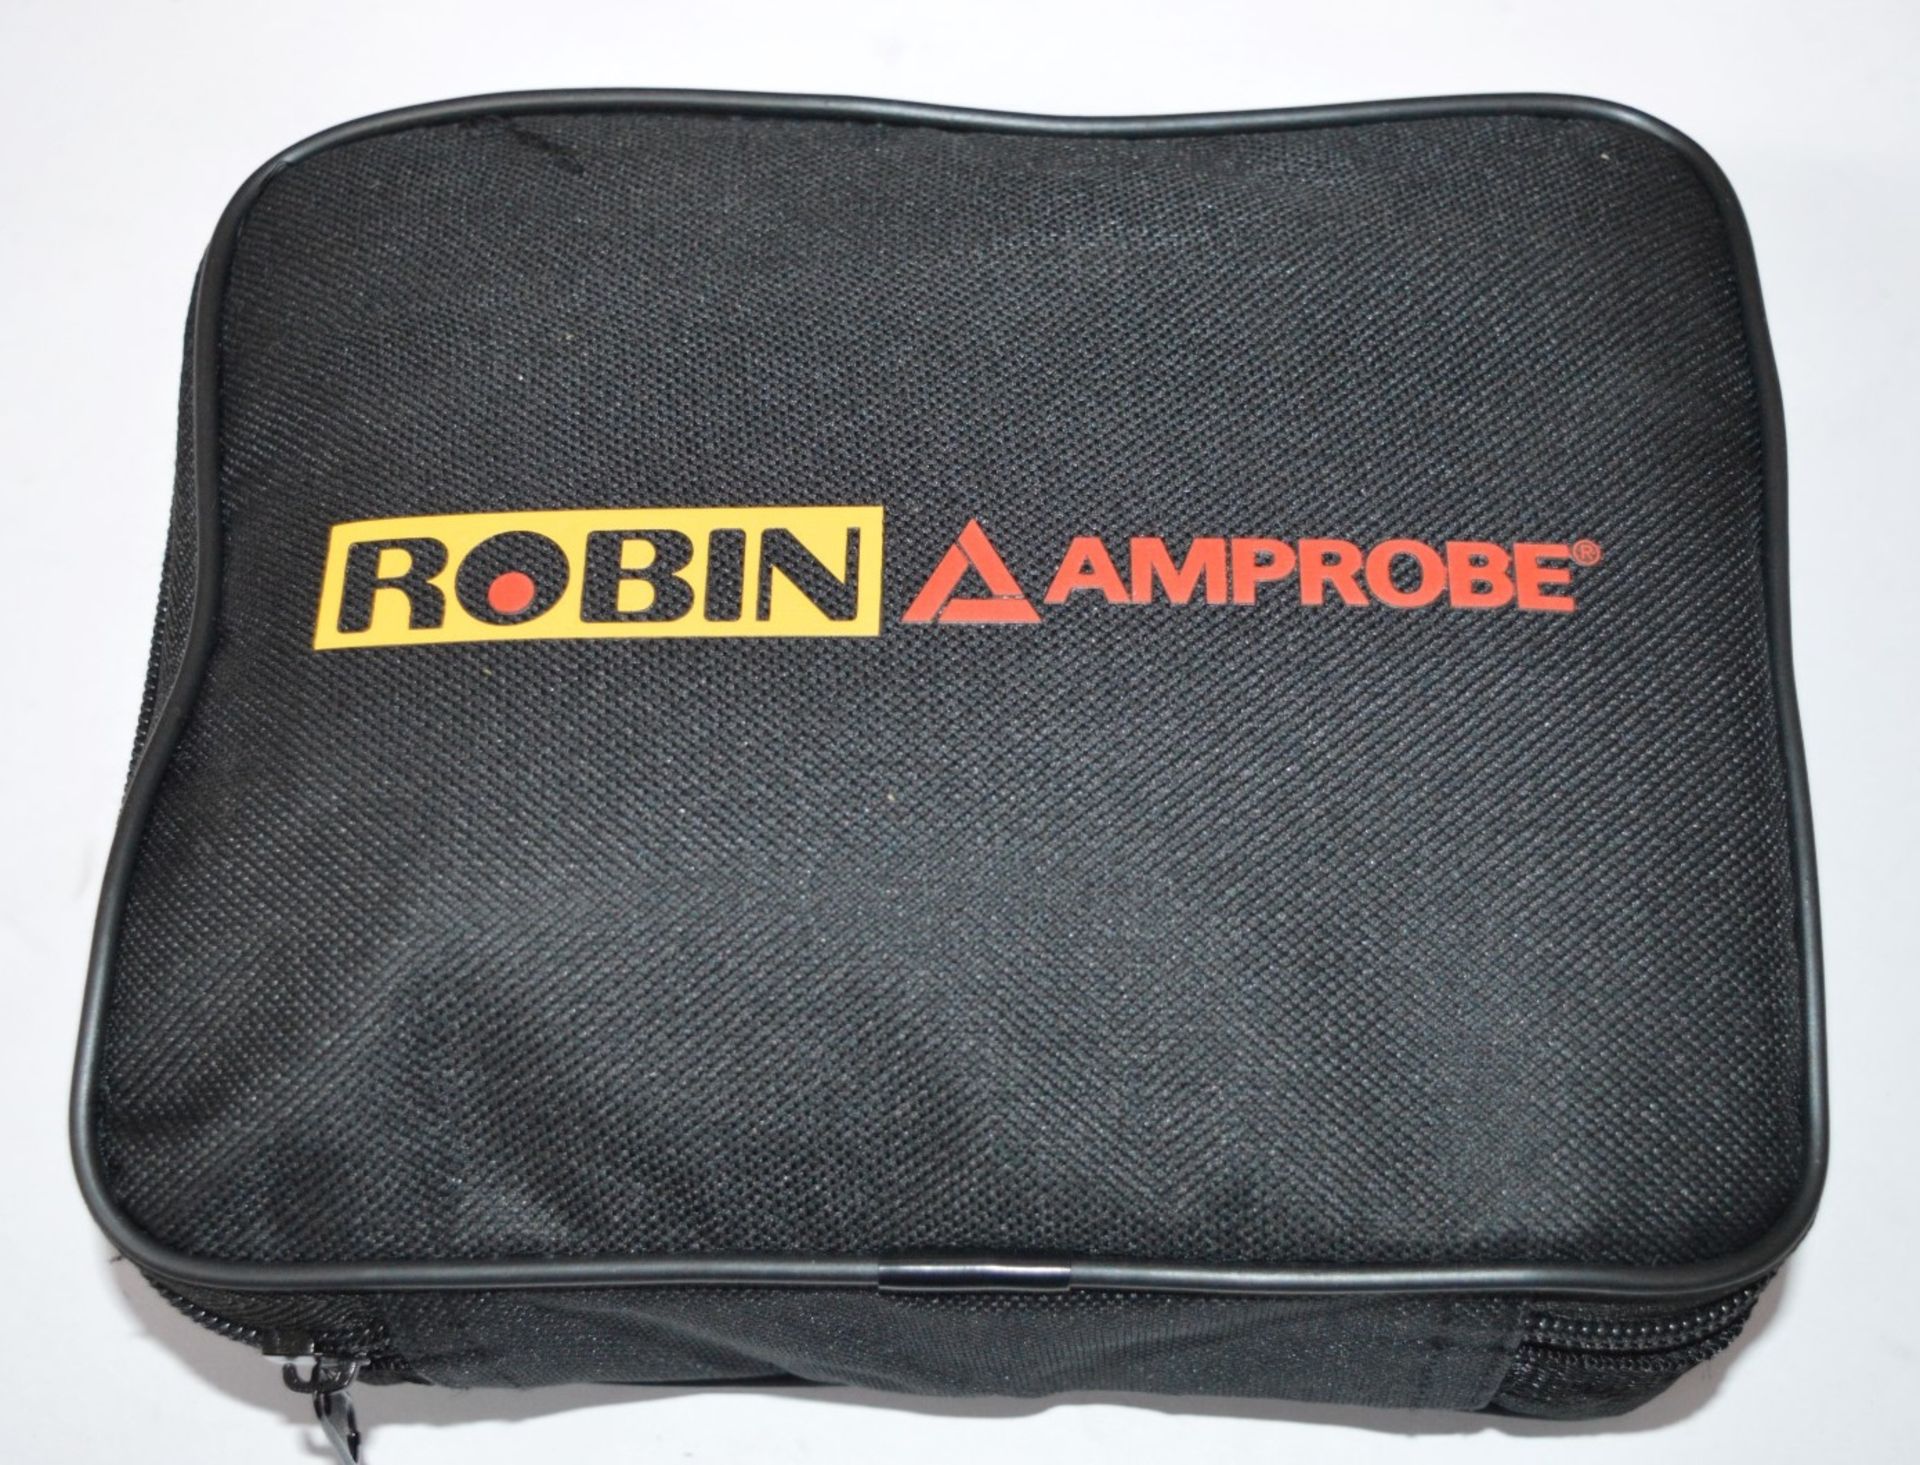 1 x Robin Amprobe Digital RCD Tester Wth Fast Trip - Model KMP7020 - Boxed With All Accessories - - Image 10 of 12